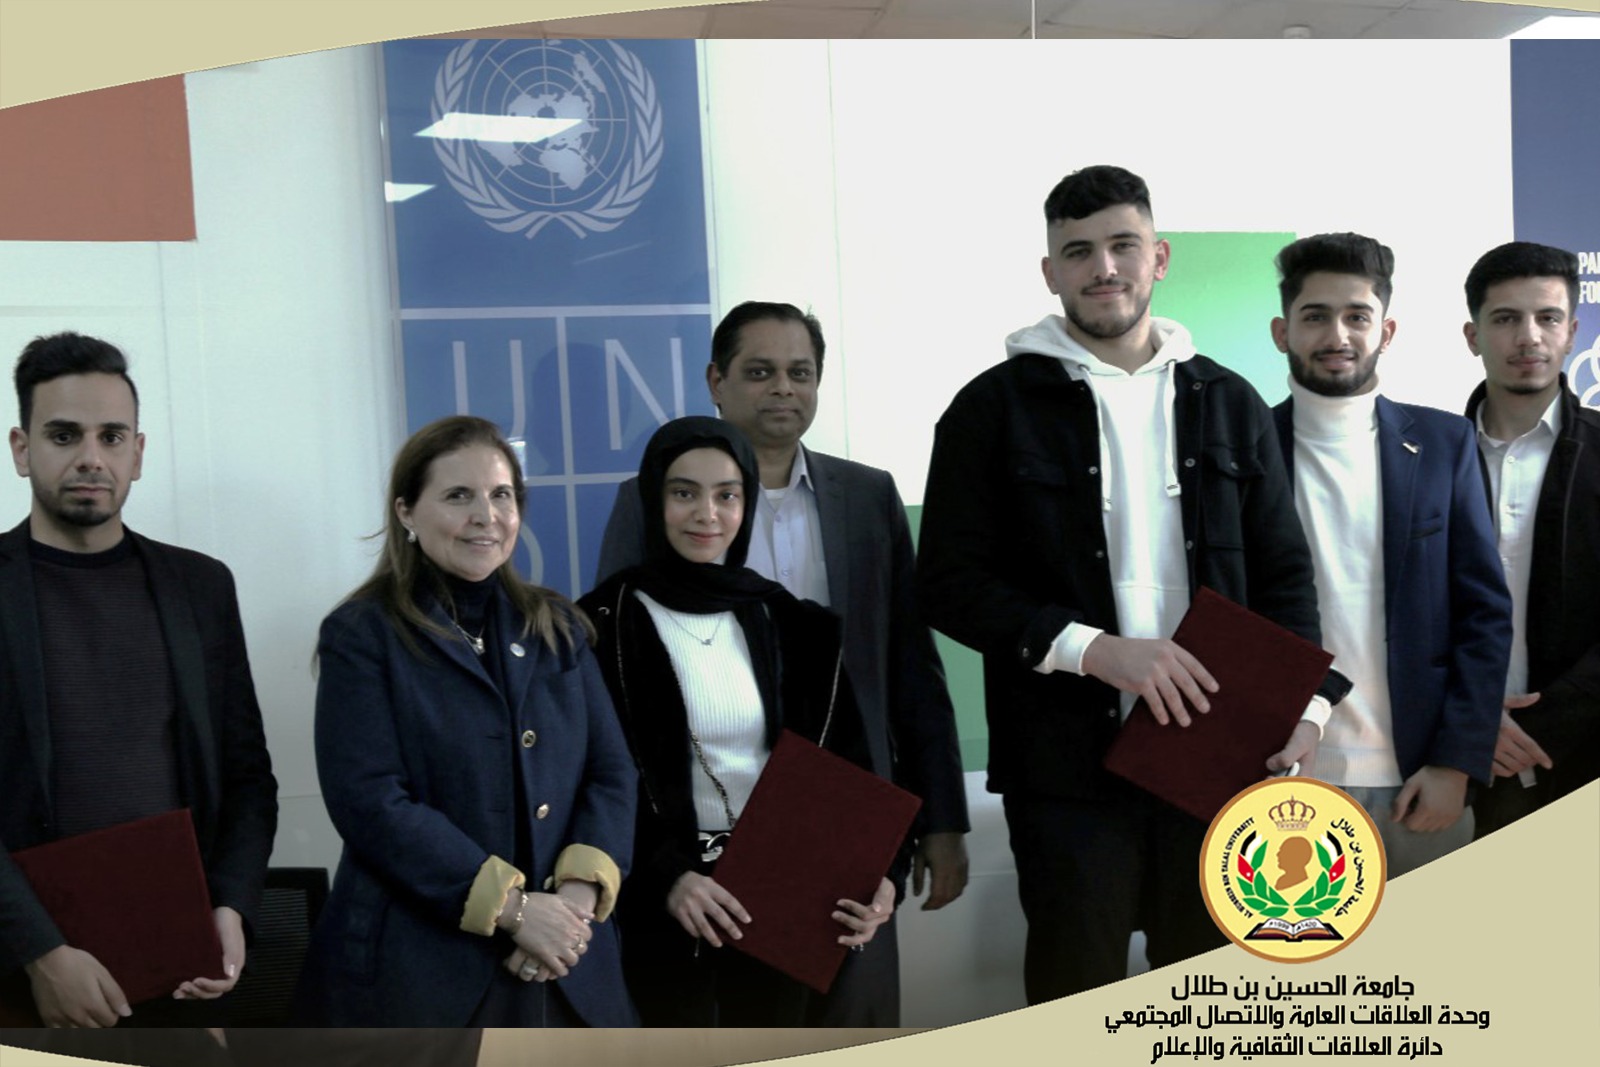 Three teams of Al Hussein Bin Talal University students win the competition launched by the United Nations Development Program in Ma’a